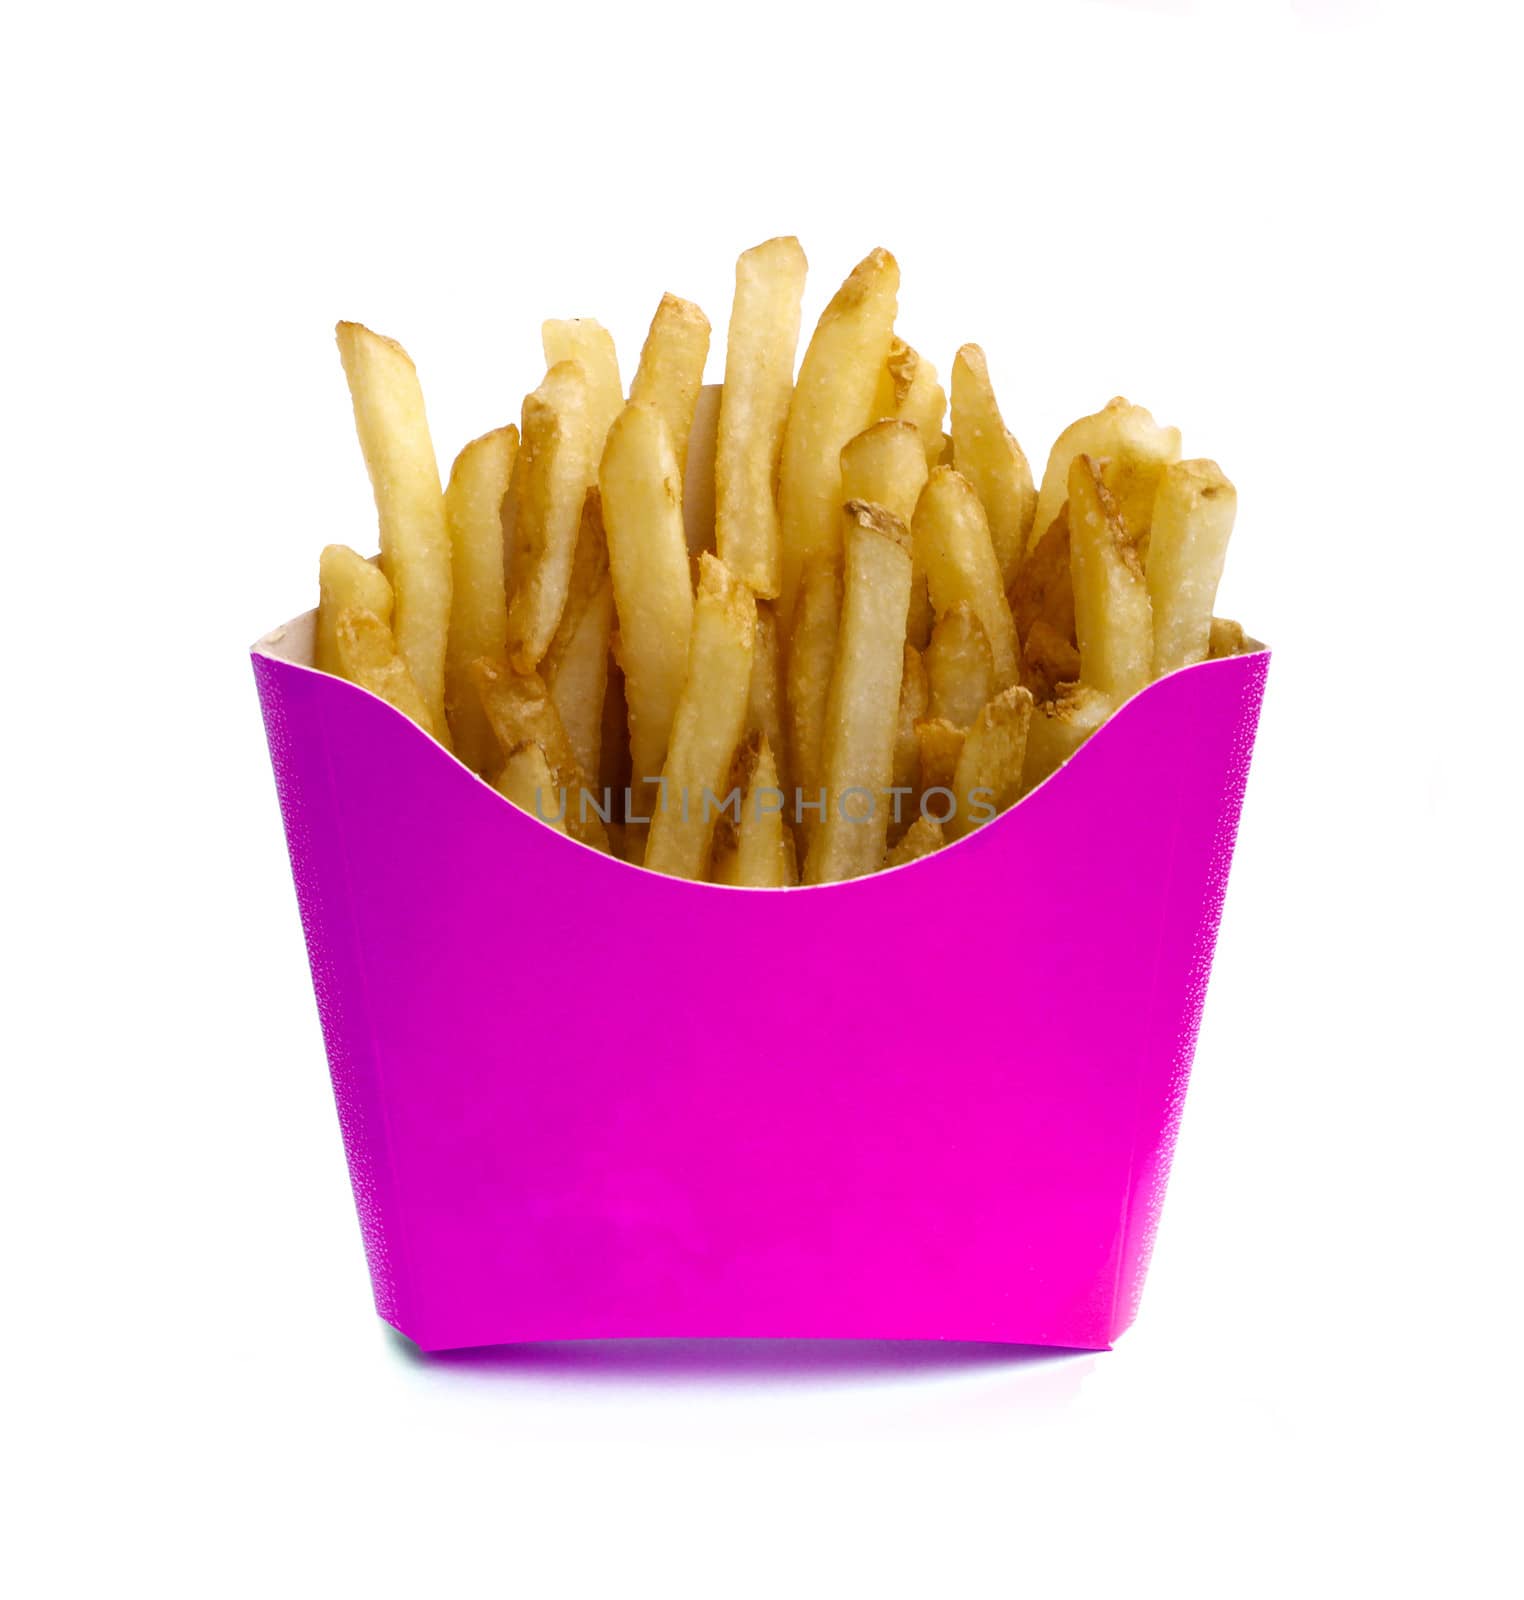 French fry in pink box by destillat